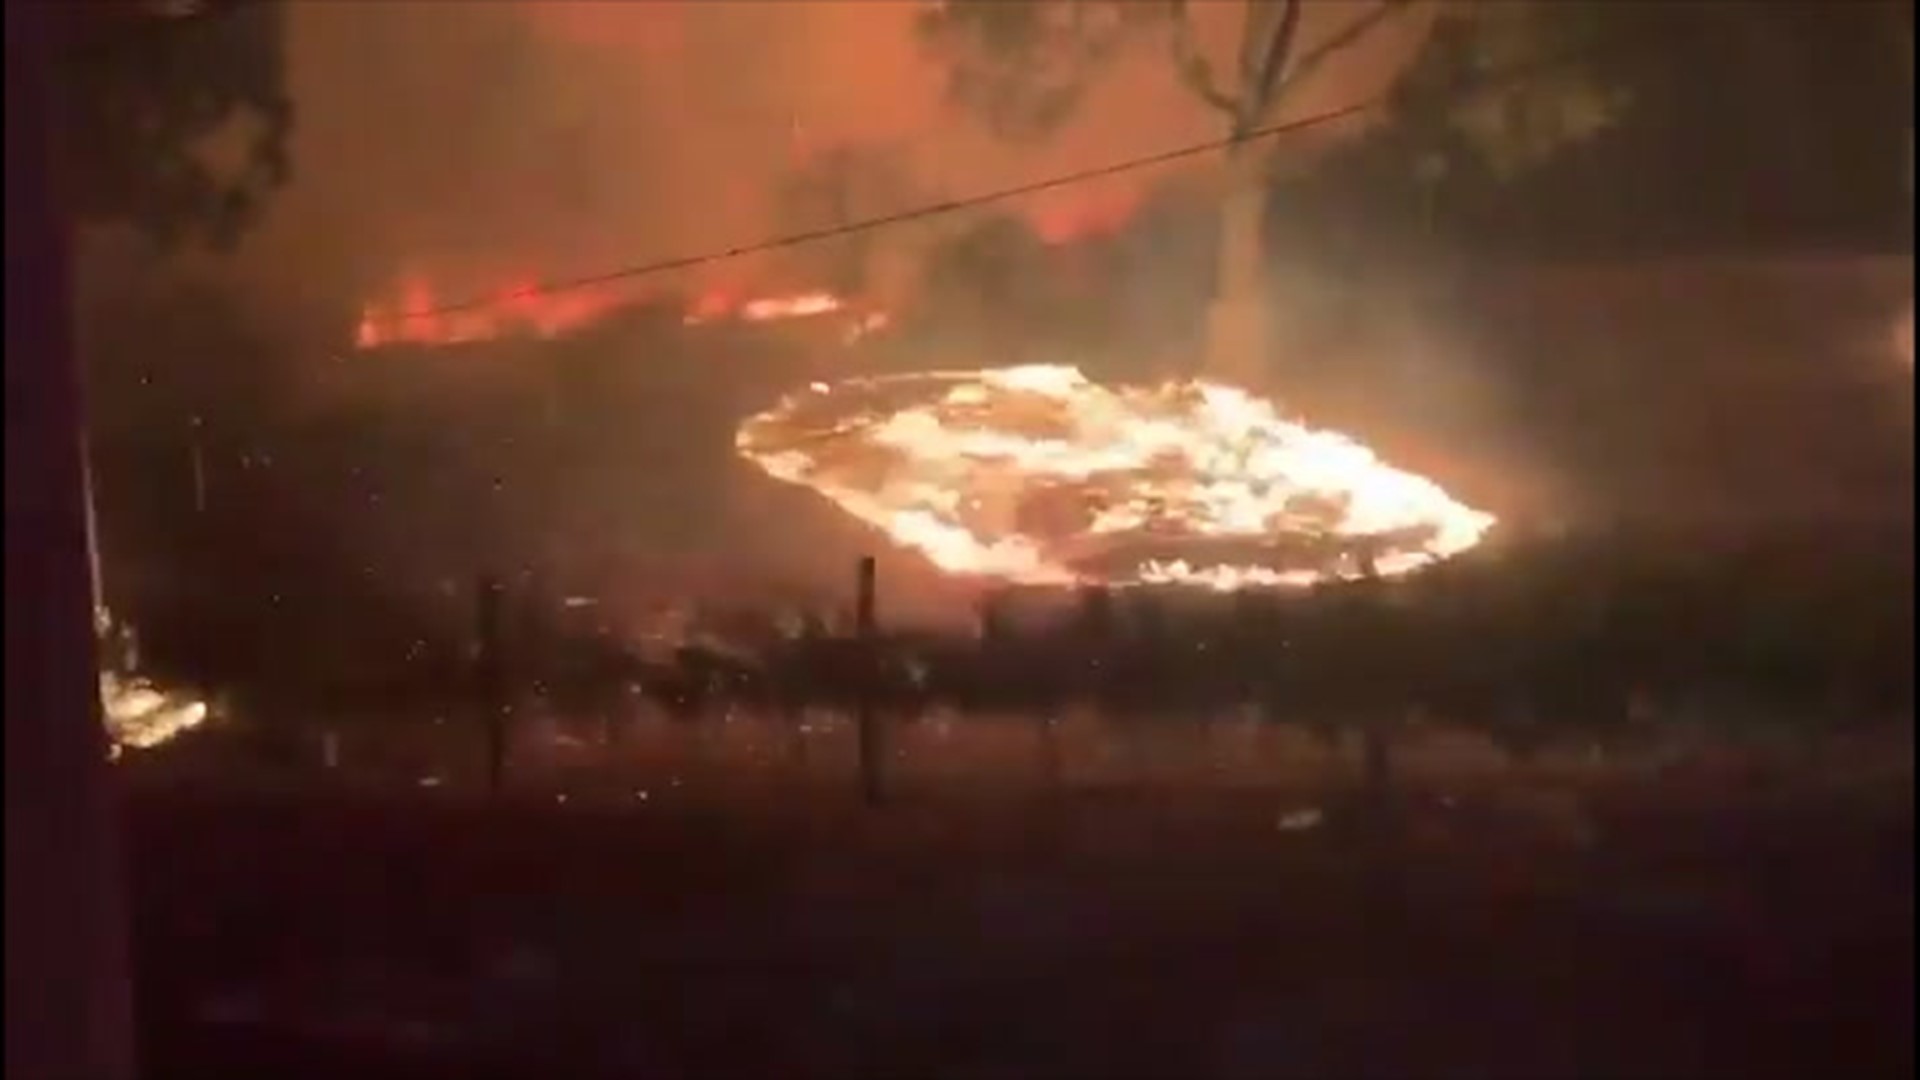 A new video released by the Alameda County Fire Department details the intense moments firefighters have spent battling the Glass Fire burning in Napa County, California.